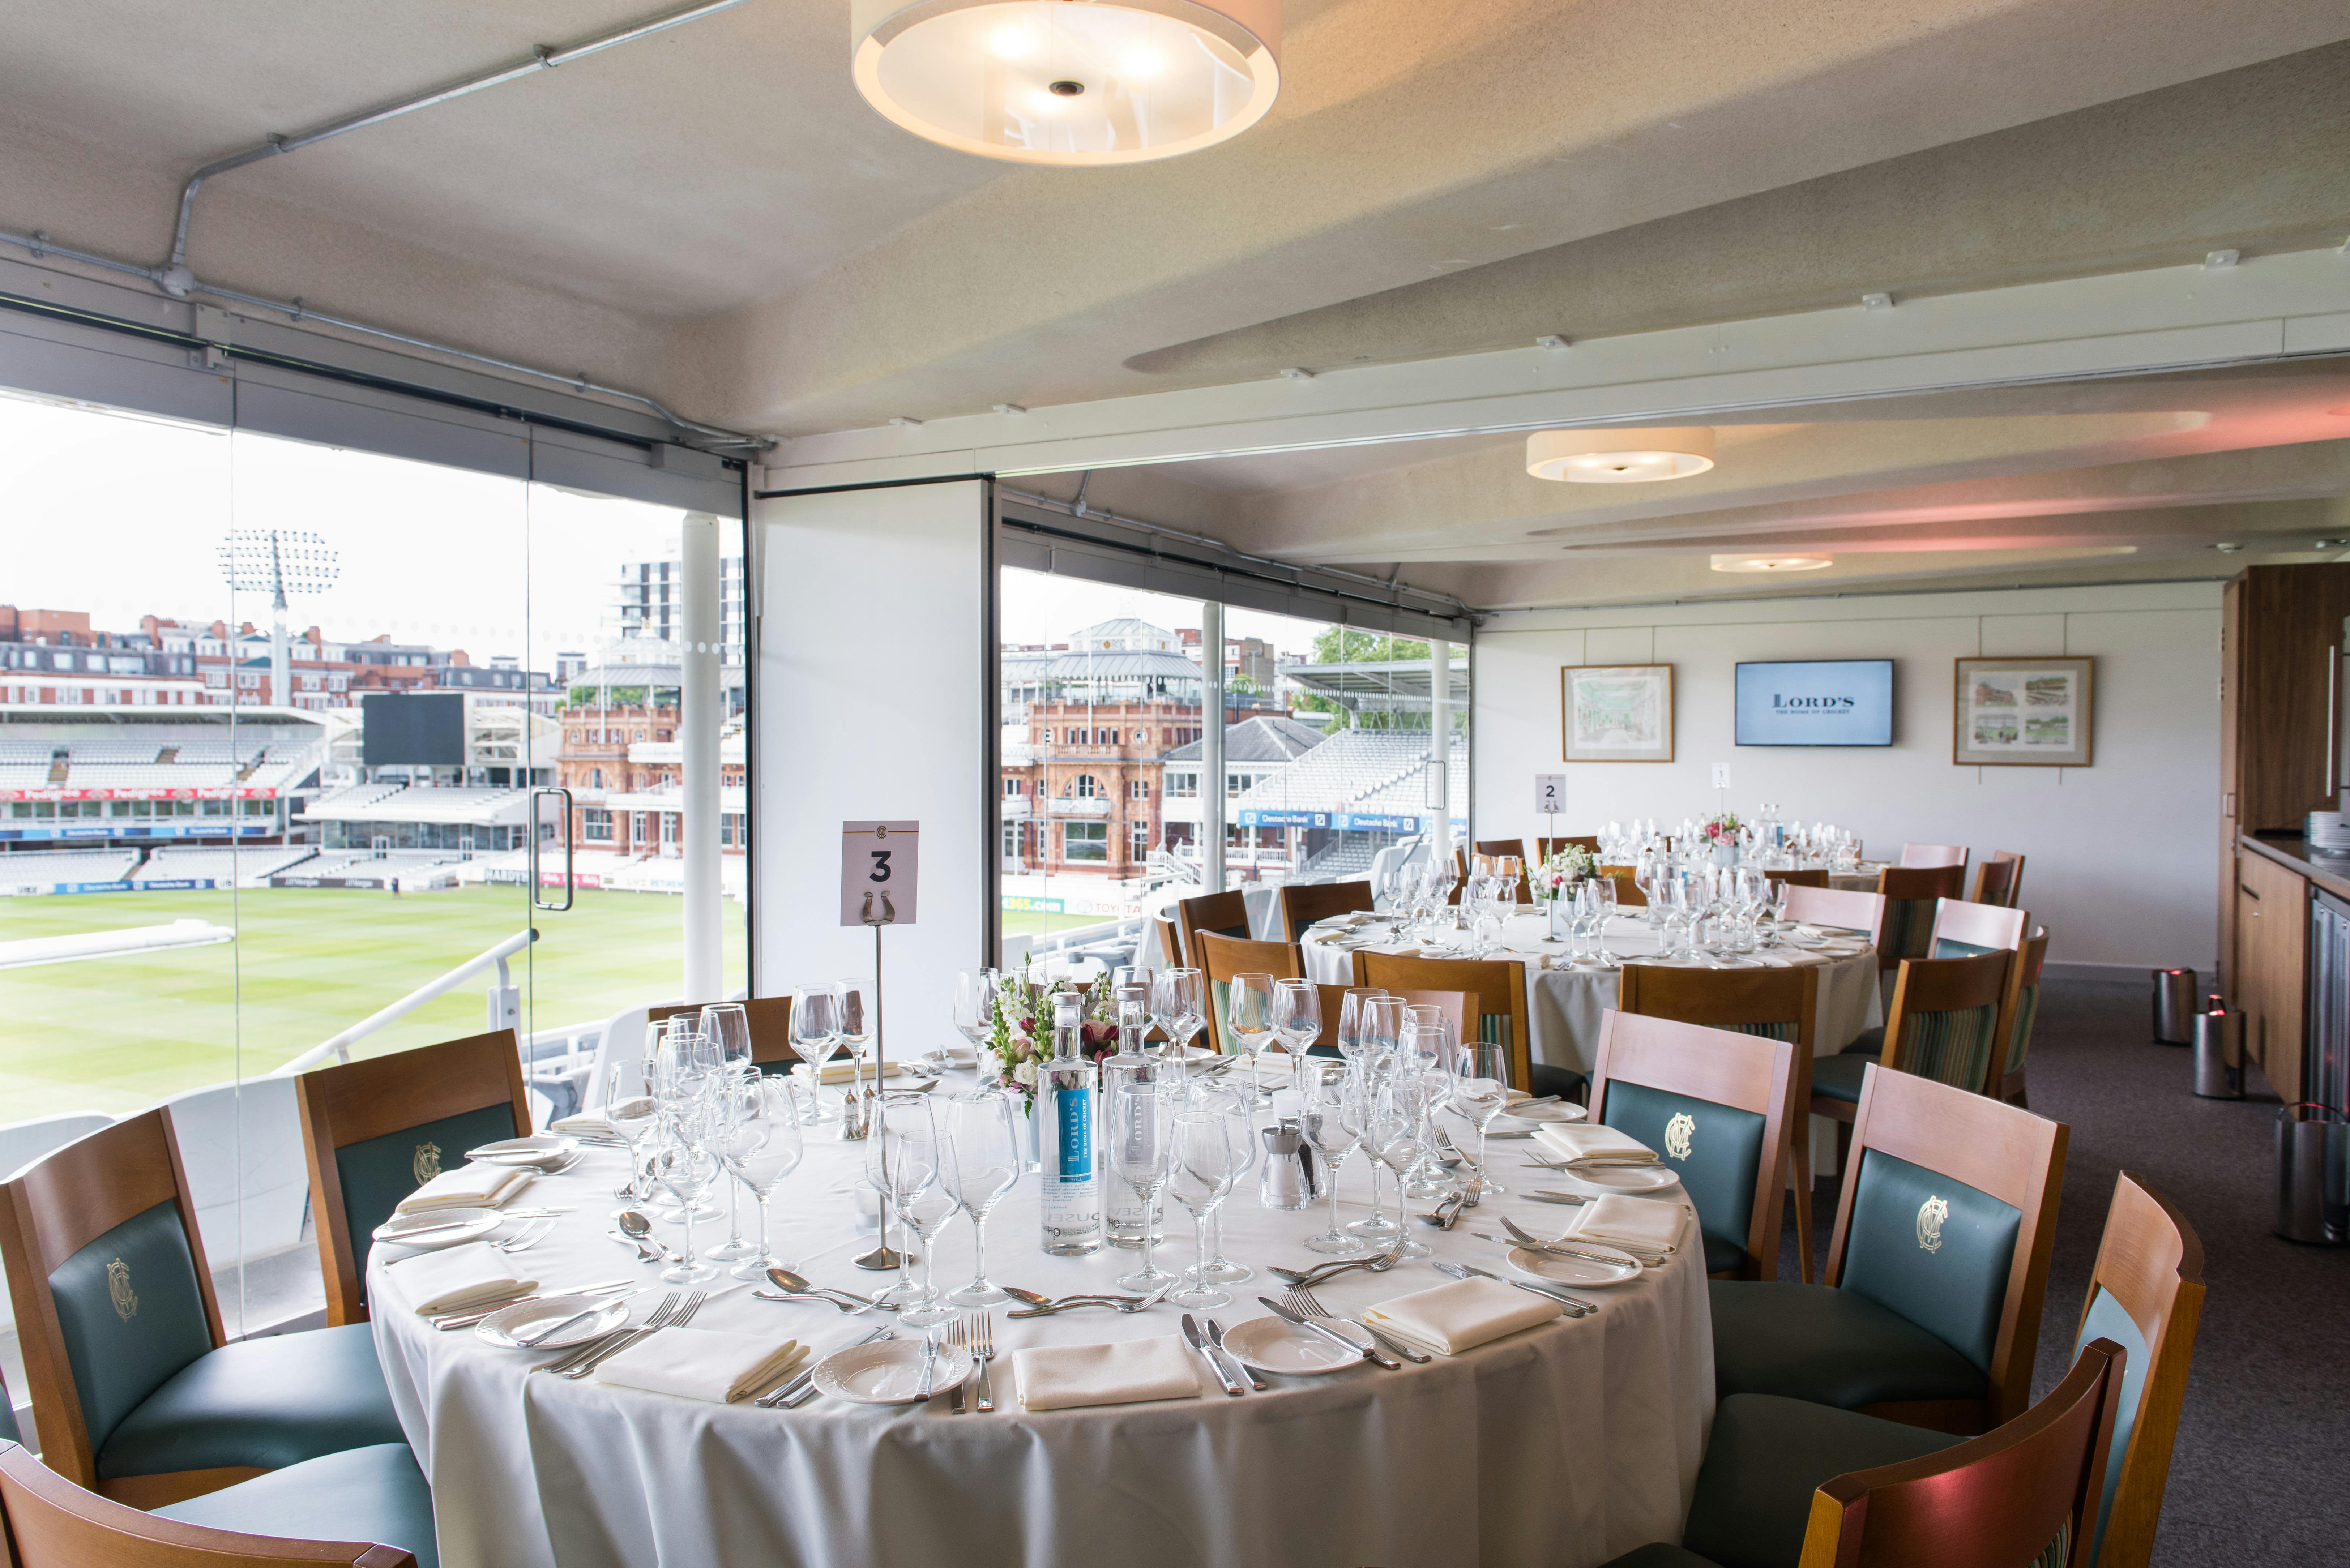 Lord's Cricket Ground - The President's Box image 1